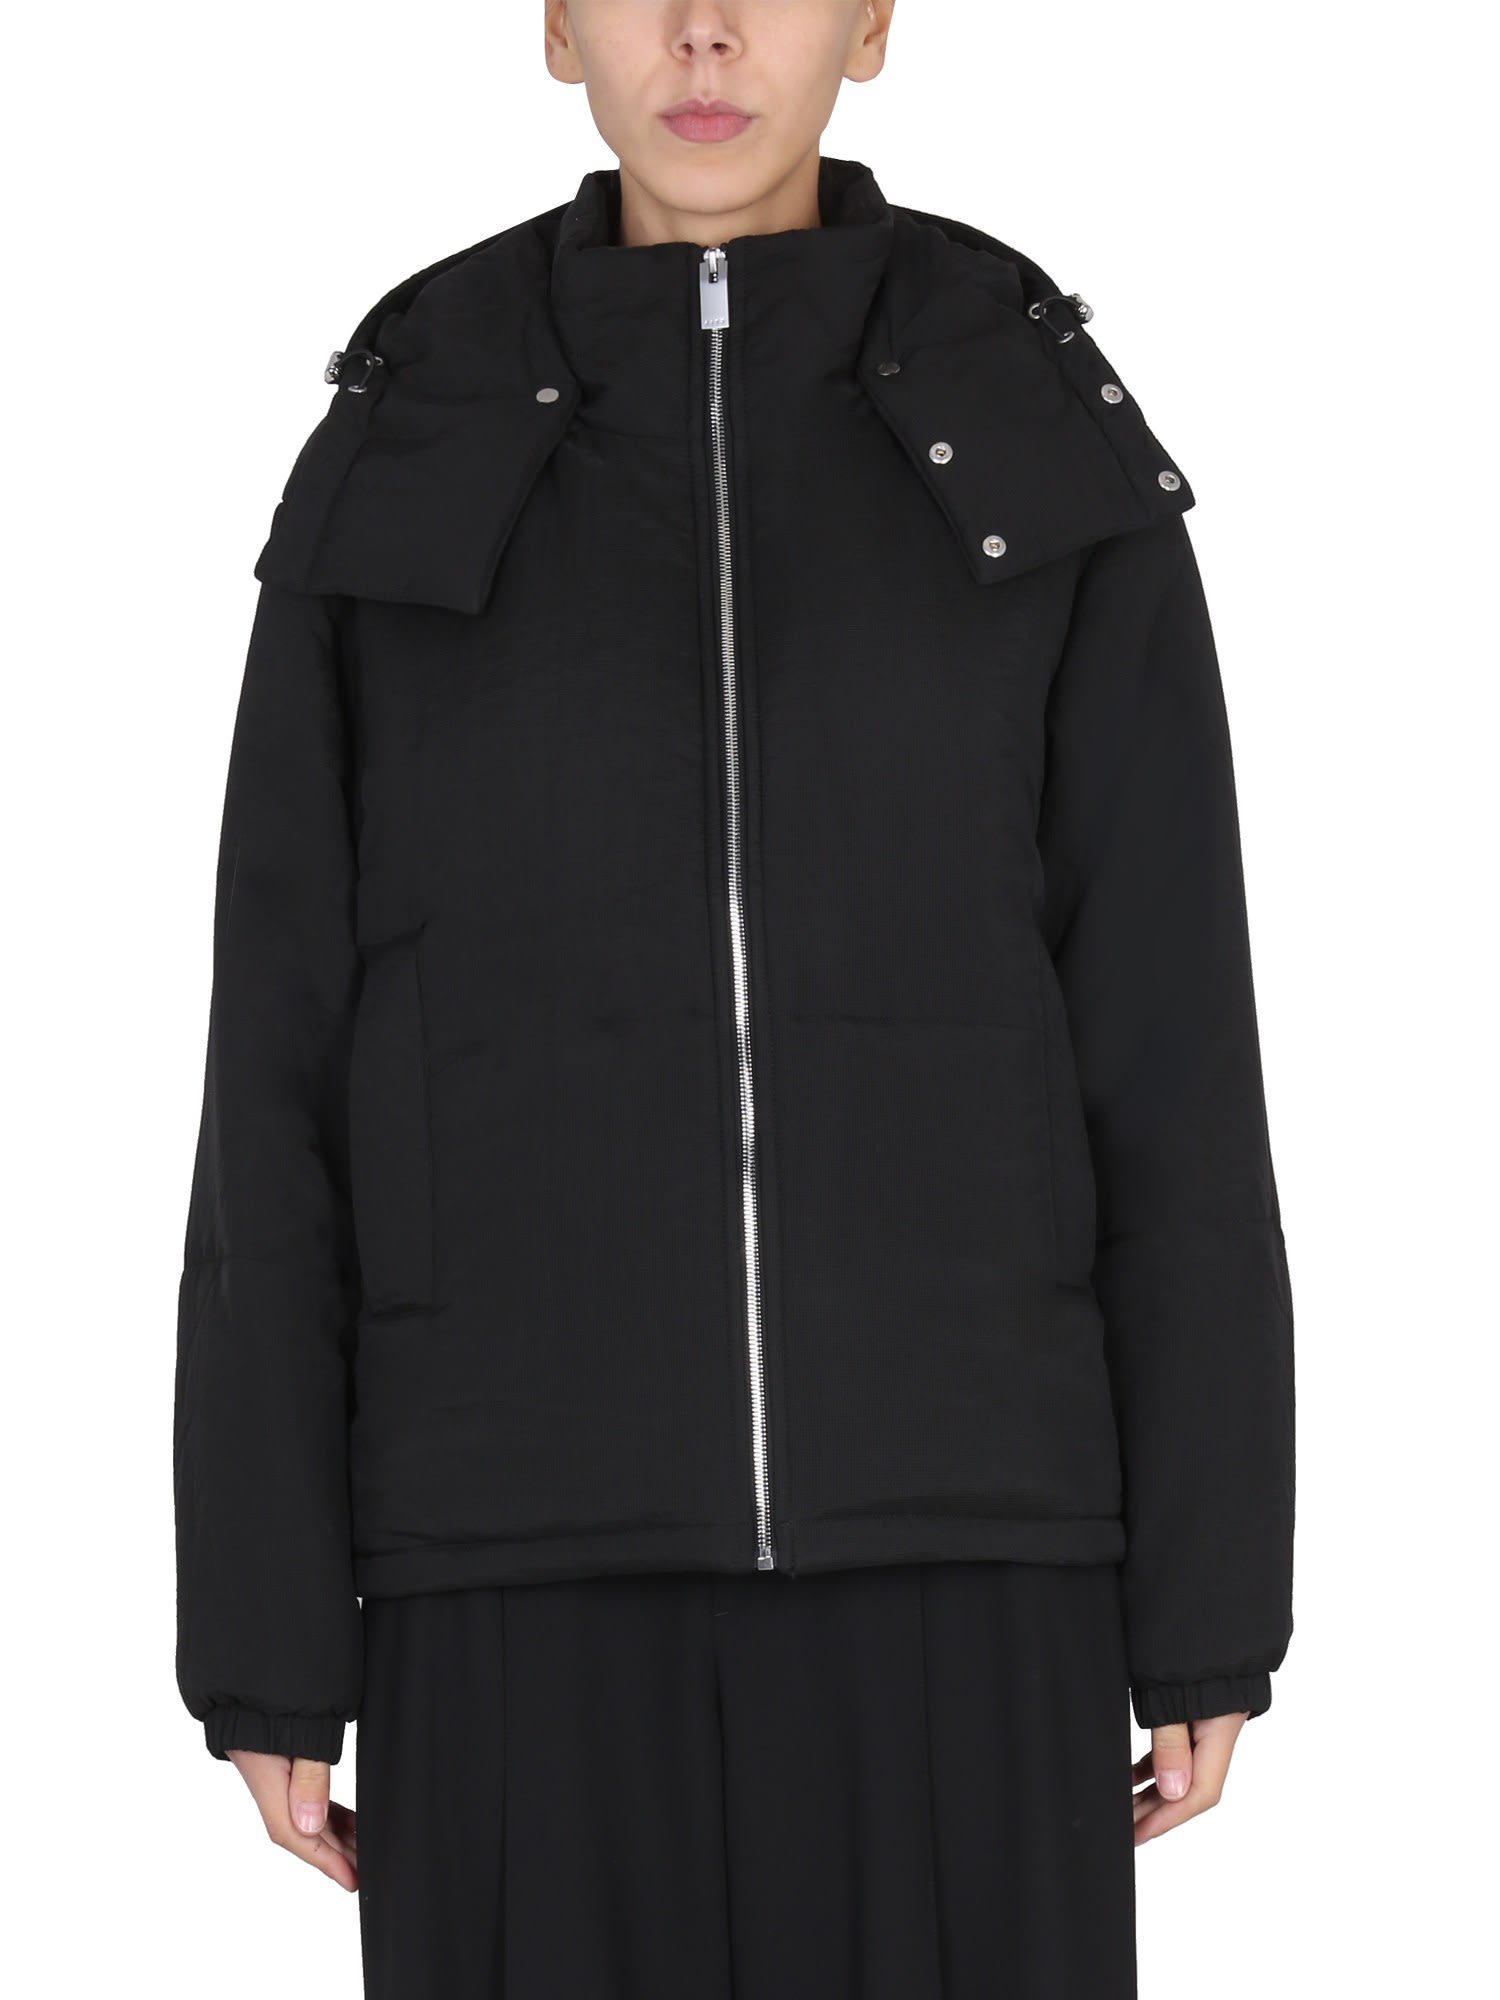 1017 ALYX 9SM Hooded Jacket With Clamp